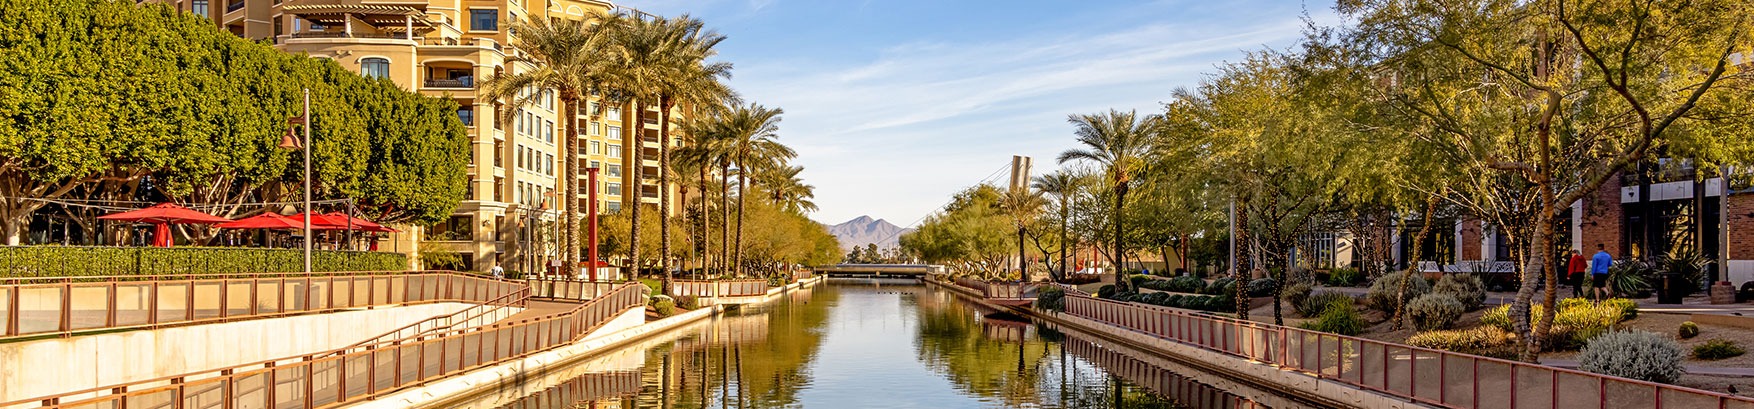 Scottsdale river canal, an area served by Scottsdale accident attorney Super Woman Super Lawyer